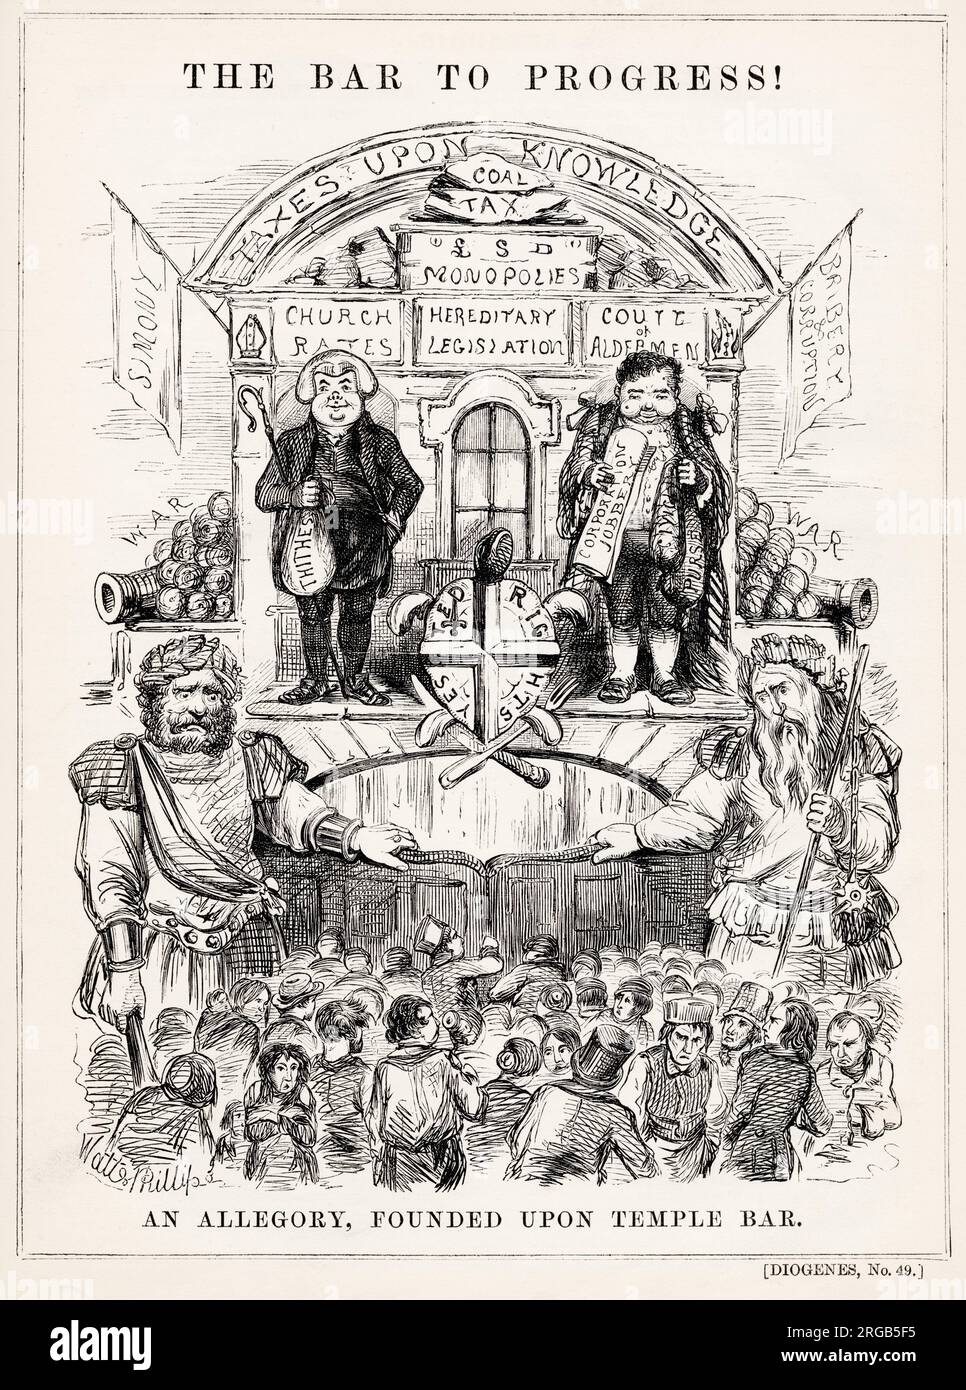 The Bar to Progress! An allegory, founded upon Temple Bar. Satirical cartoon, 1853. Temple Bar, the entrance to the City of London in the west, closes its gates against ordinary people and progress. Gog and Magog stand on either side guarding the gate while in the City, bribery and corruption, simony, taxes upon knowledge and corporation jobbery flourish. Stock Photo